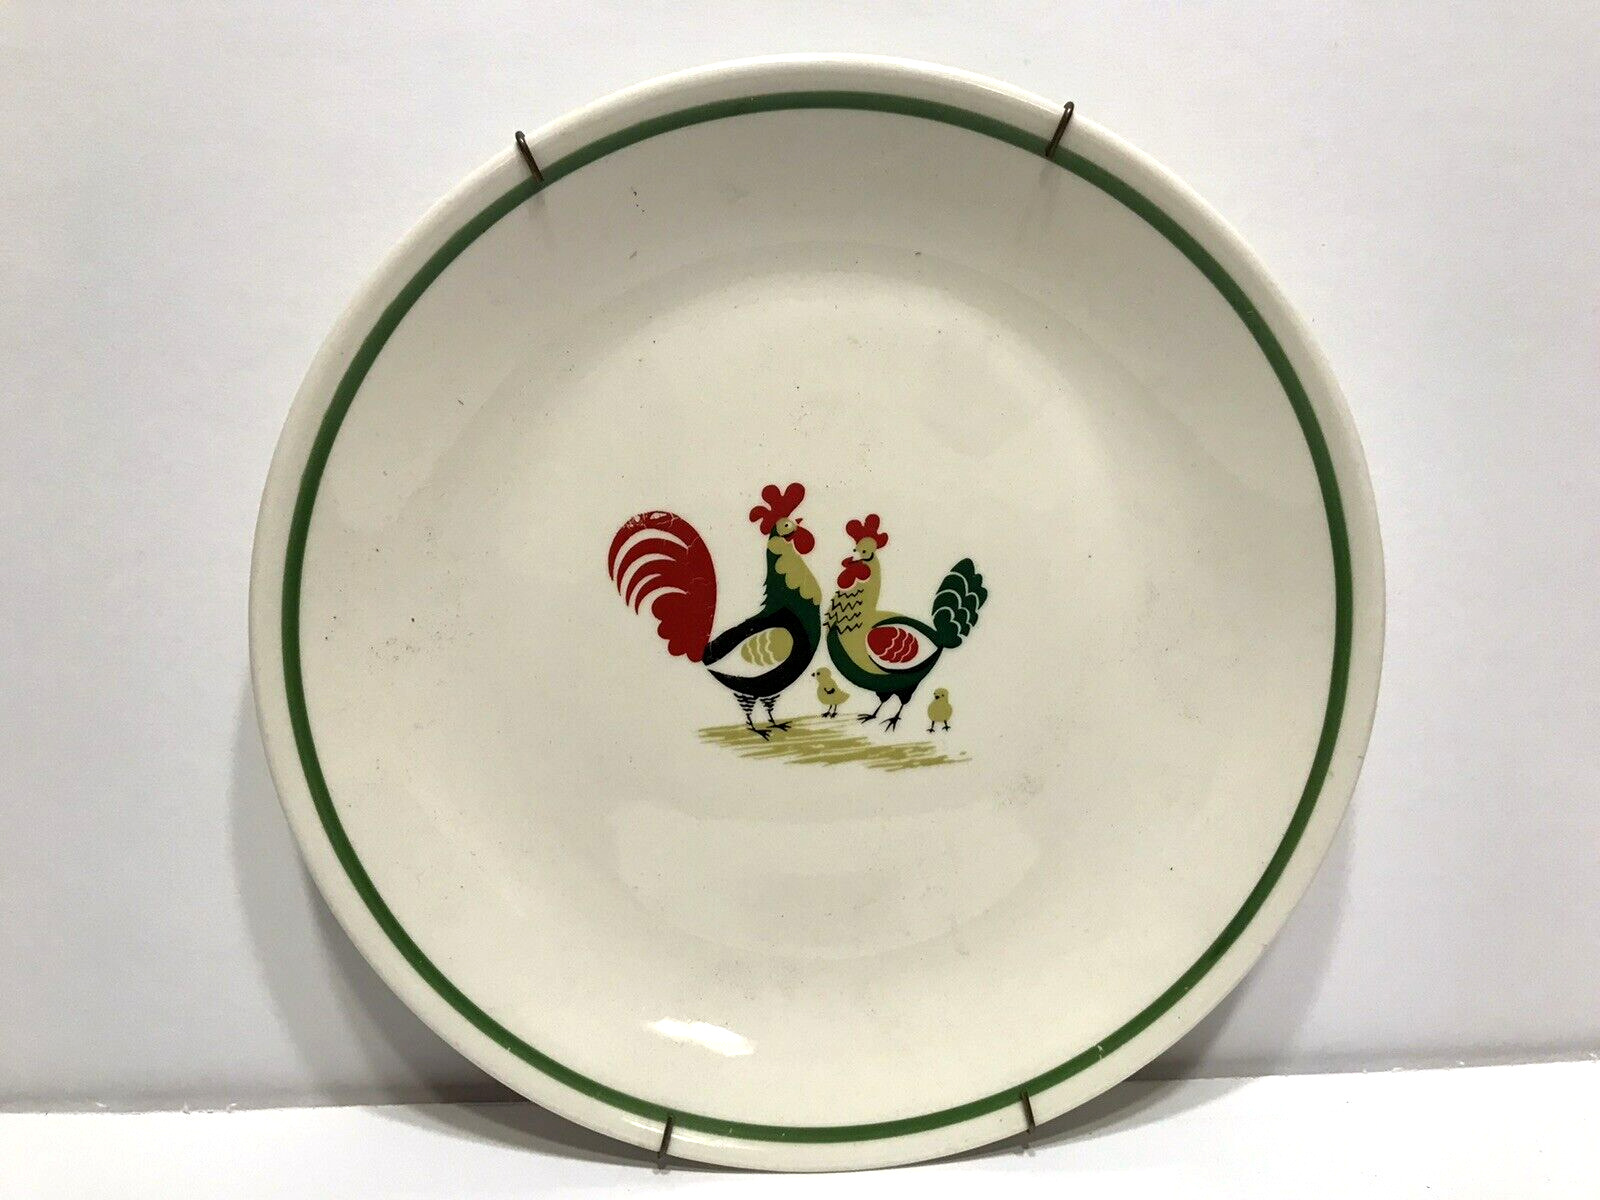 Vintage Steubenville Horizon Farmhouse Rooster Plate with Wall Hanger